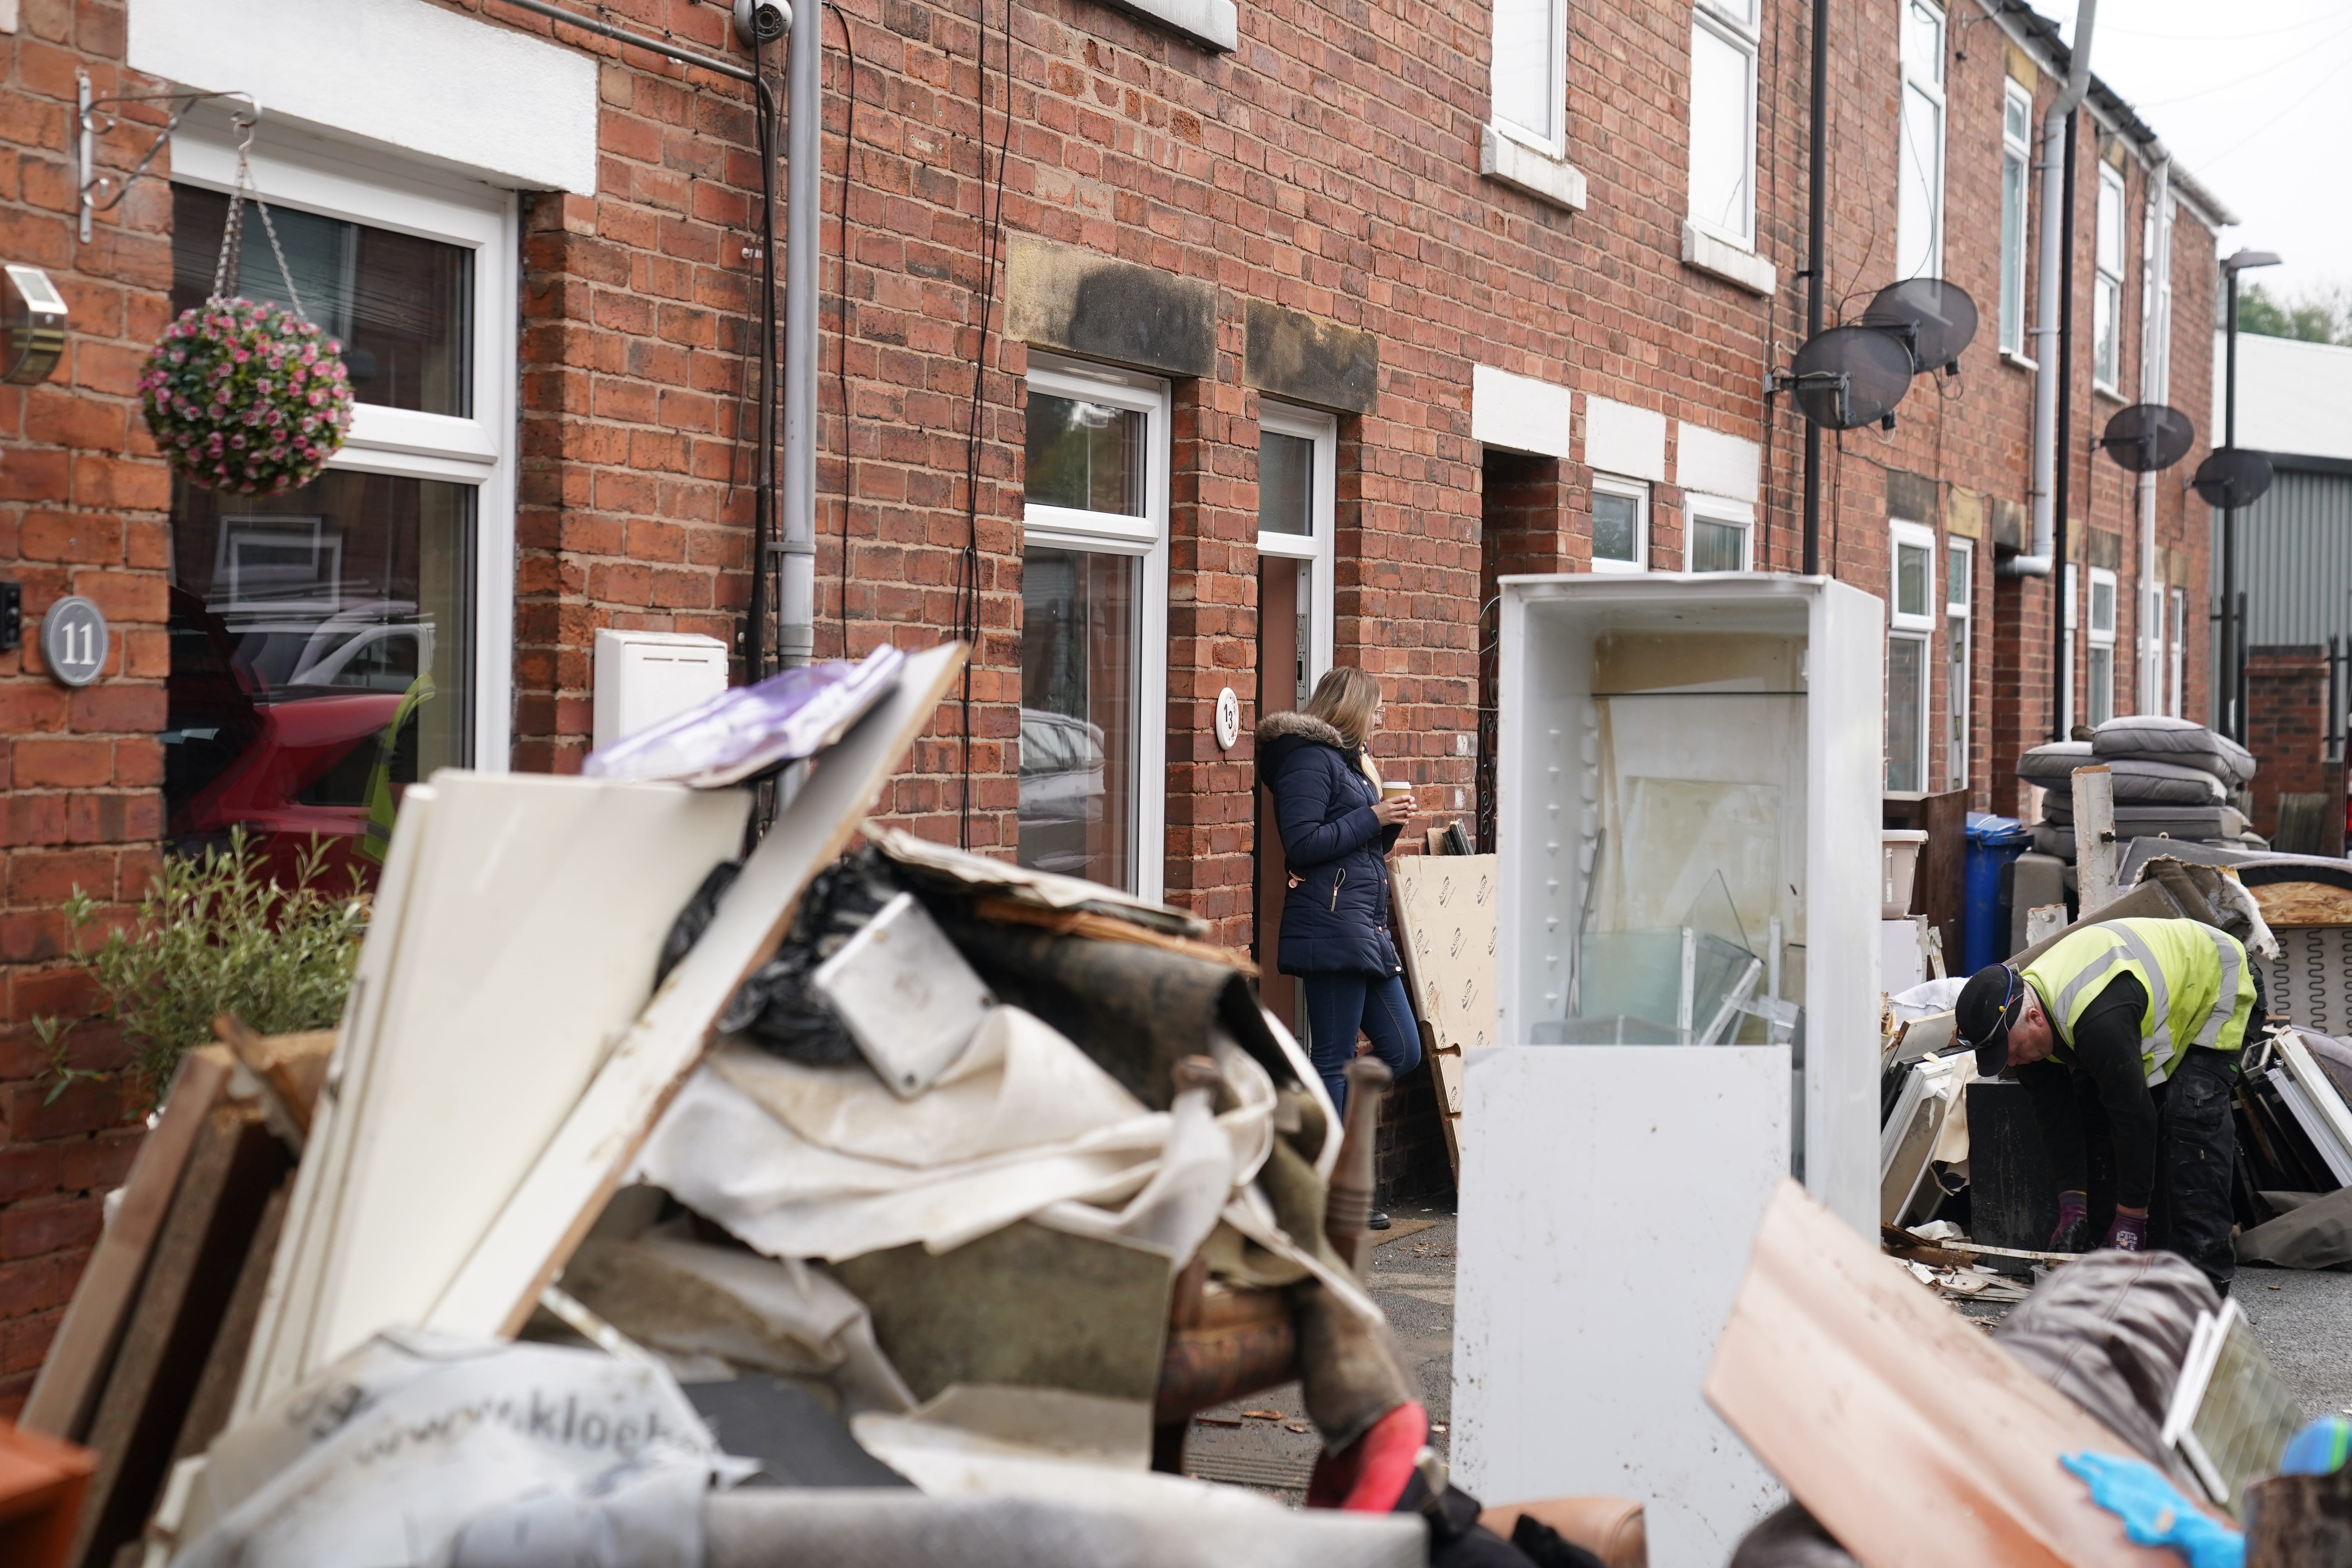 <p>A resident looks at a local authority worker collecting damaged furniture from outside a property on Sherwood Street in Chesterfield, as the clean up began in the aftermath of Storm Babet</p>